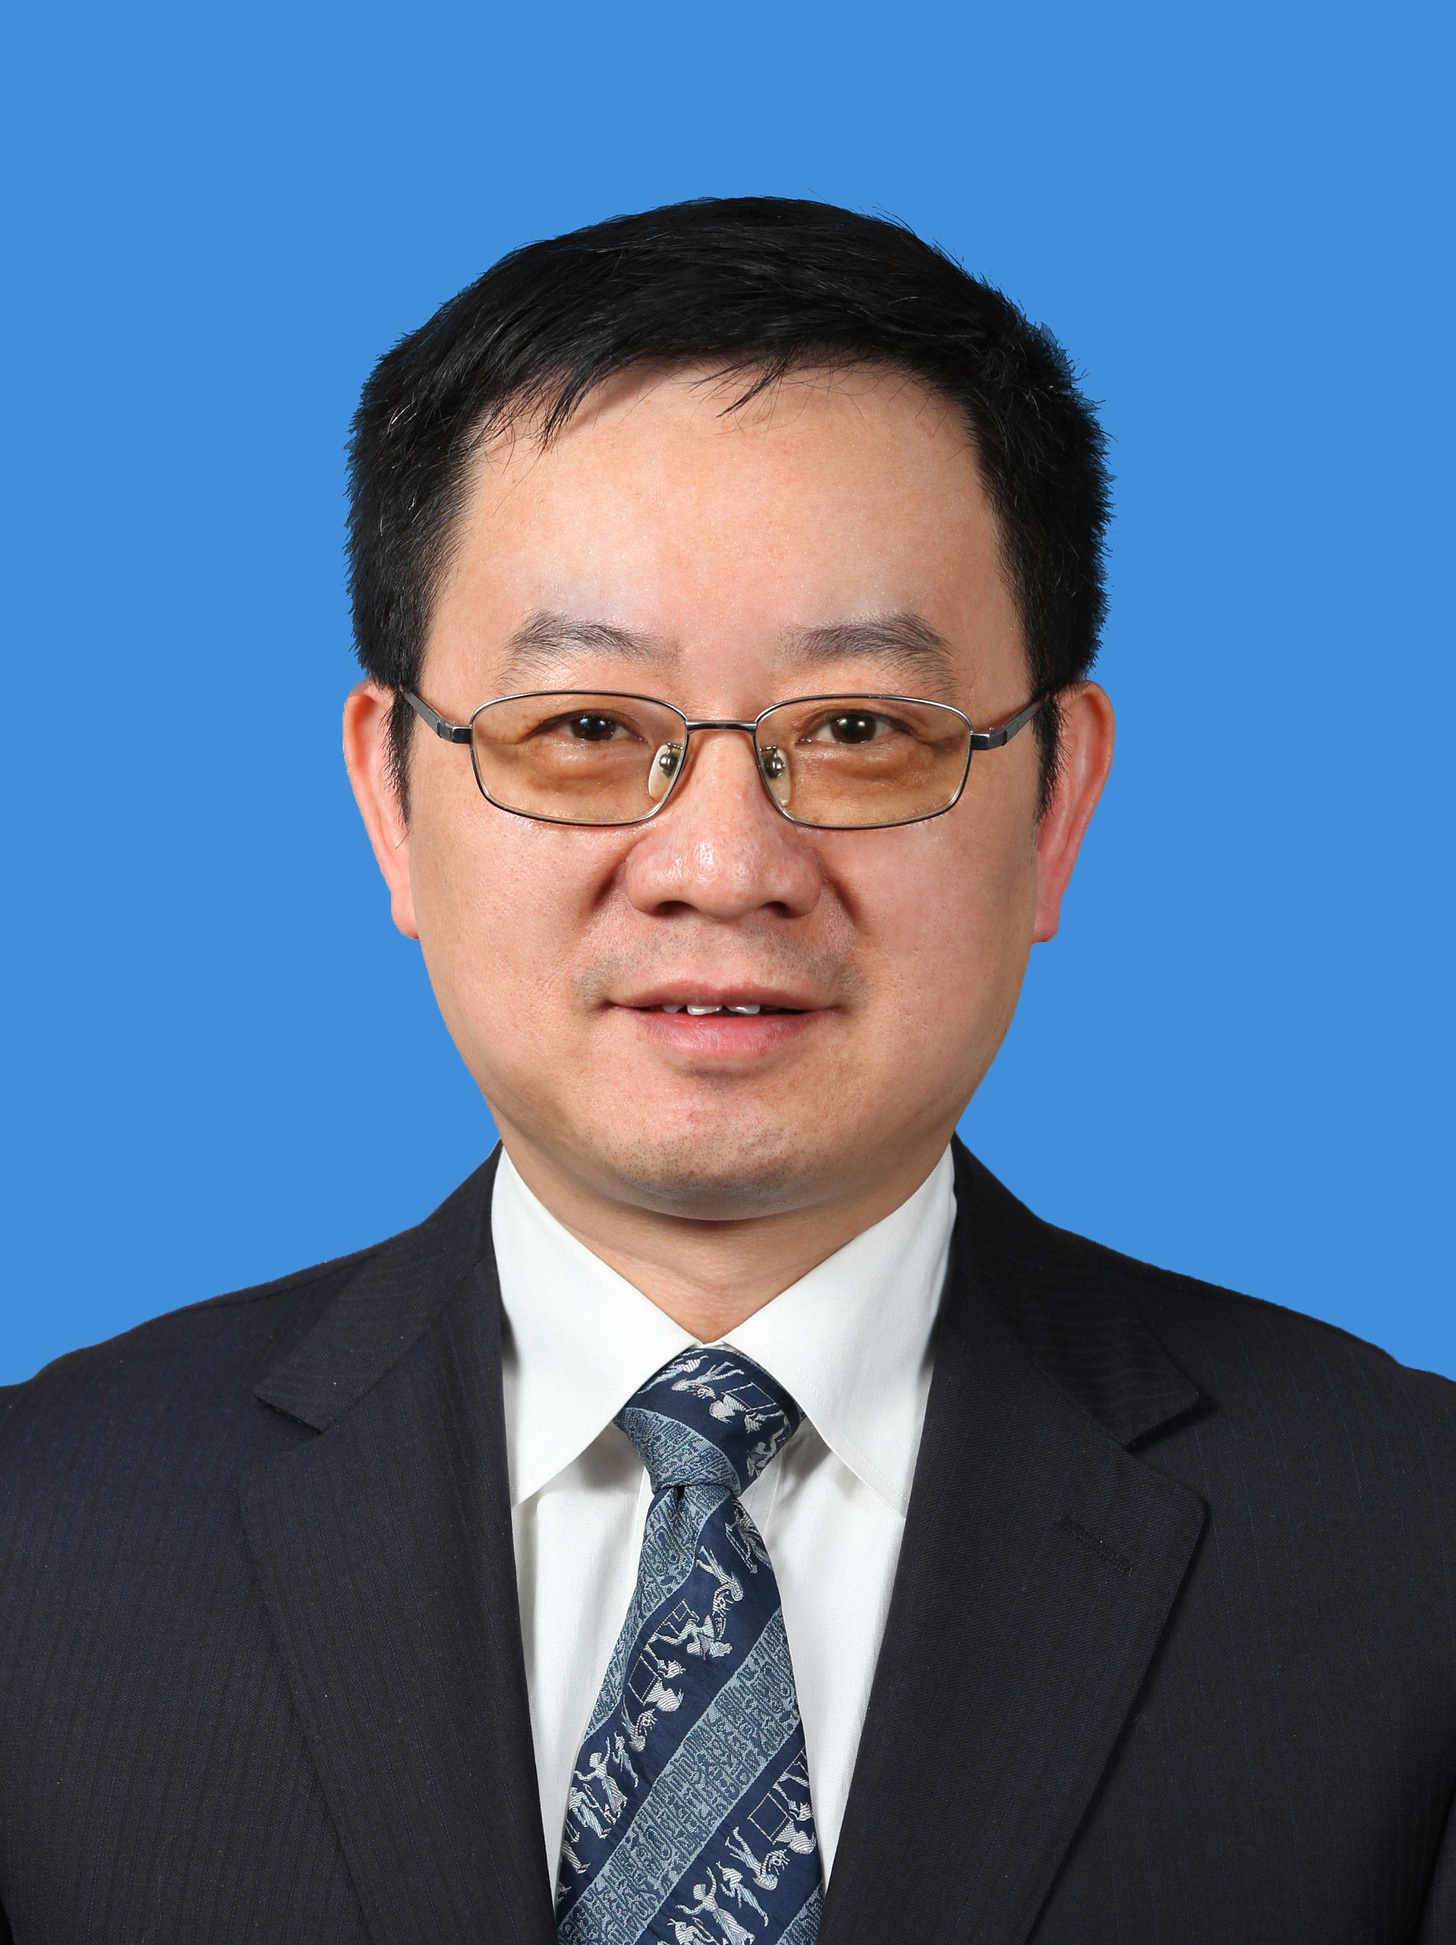 Gao Xiang’s career has largely focused on academia, but he has also served as Fujian province’s propaganda chief and as deputy director of what is now China’s Central Cyberspace Affairs Commission. Photo: Baidu